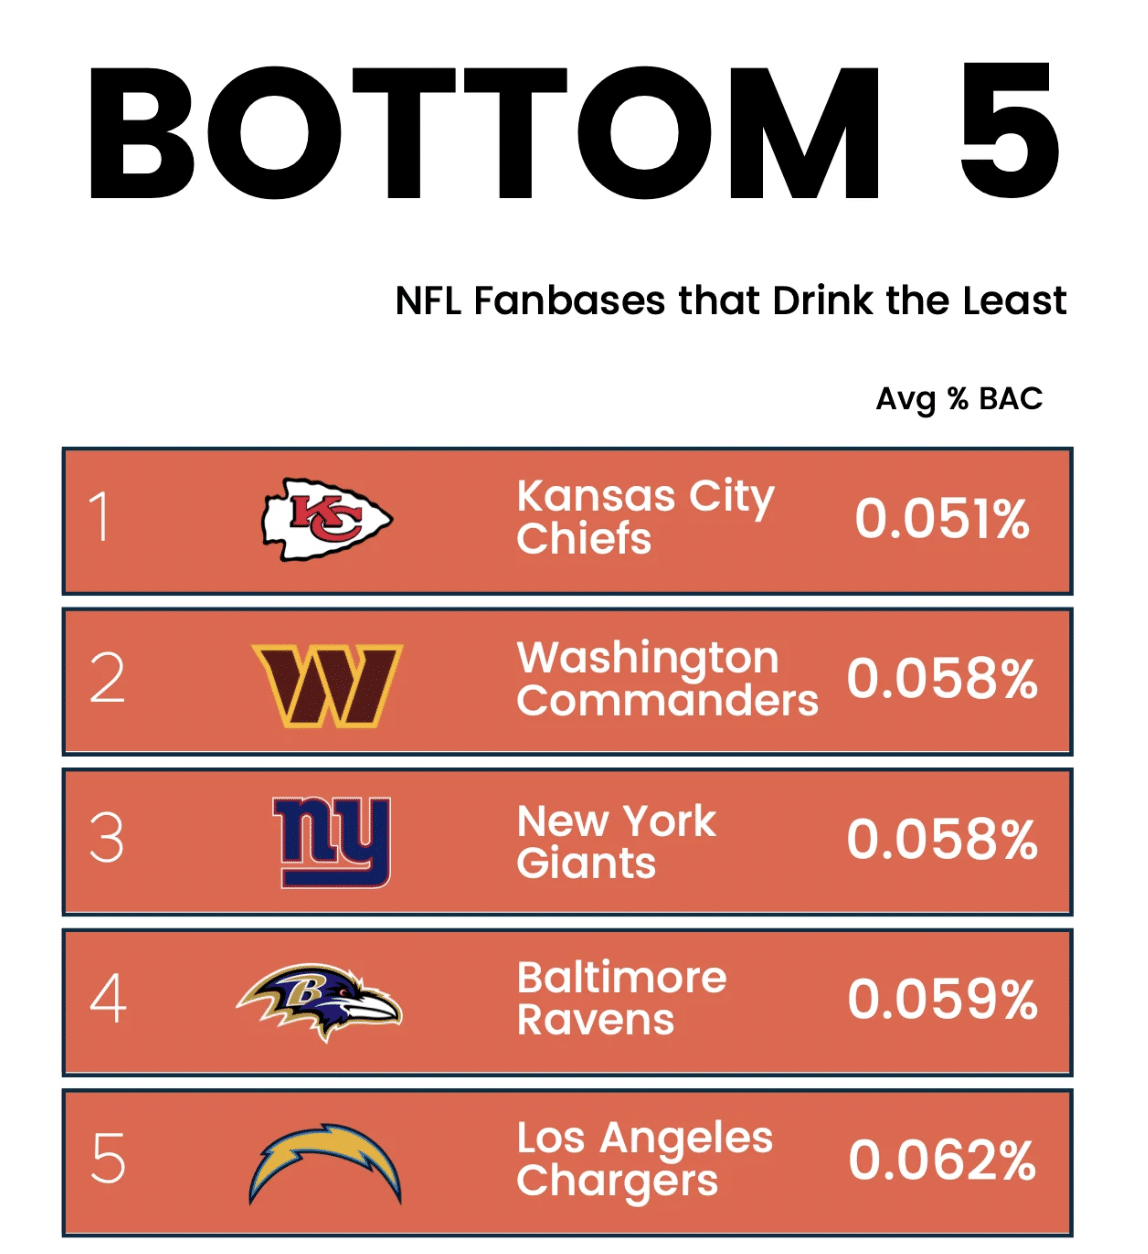 Top 5 NFL teams that drink the least.